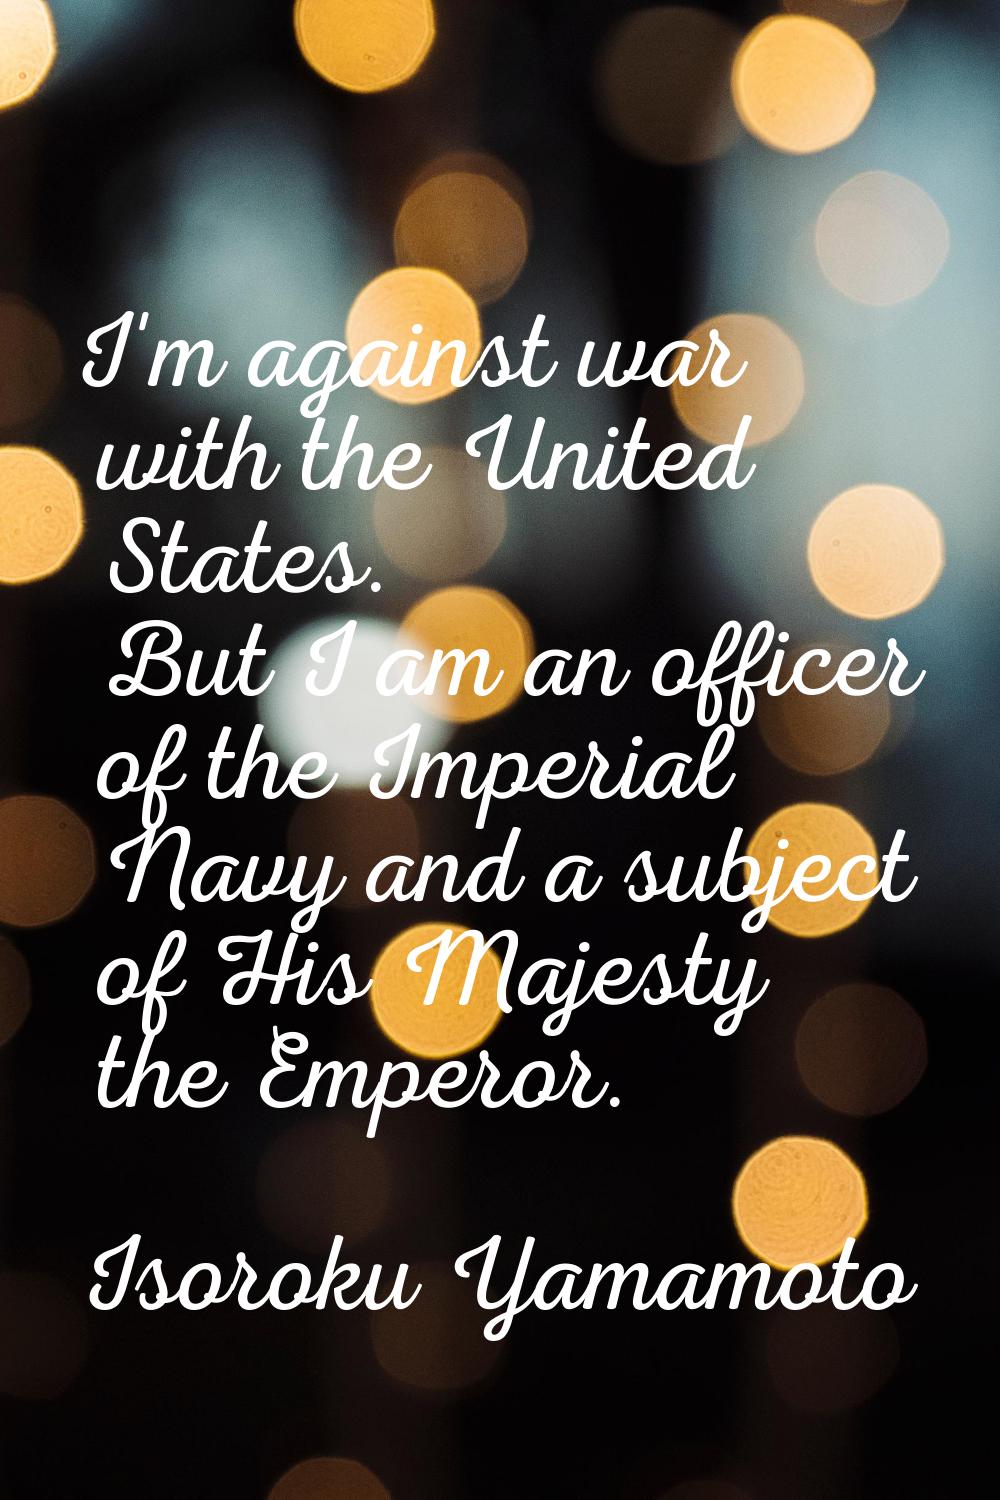 I'm against war with the United States. But I am an officer of the Imperial Navy and a subject of H